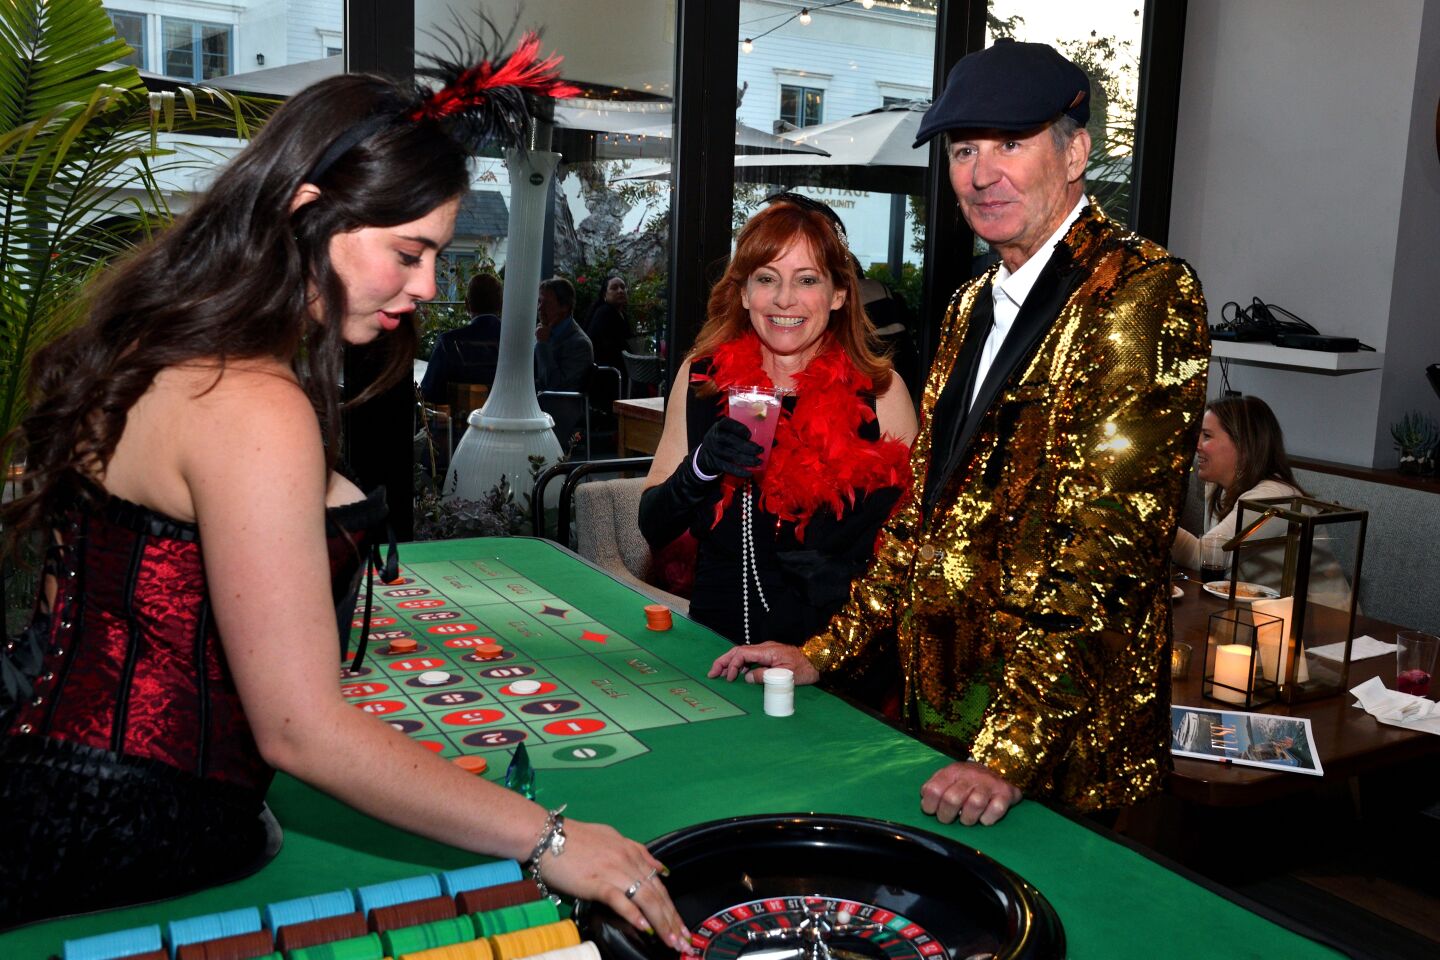 Emily Rae spins a roulette wheel for Suzanne Kelley and Loc Waders at the “Le Cabaret du Concours” cocktail party.